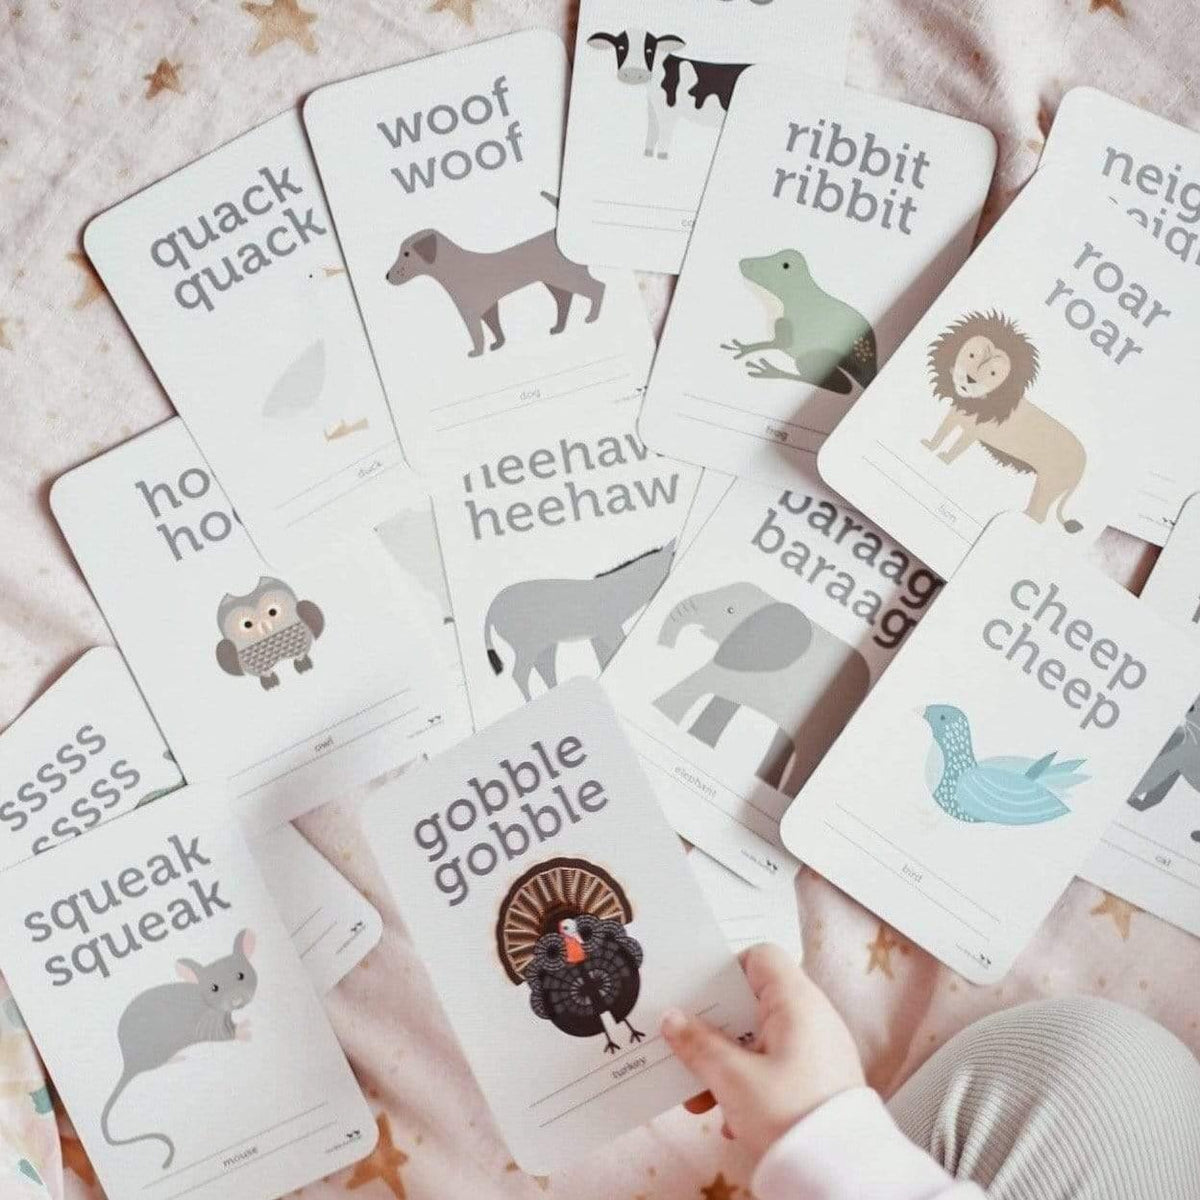 The Curated Parcel - Animal Sounds Flash Cards 